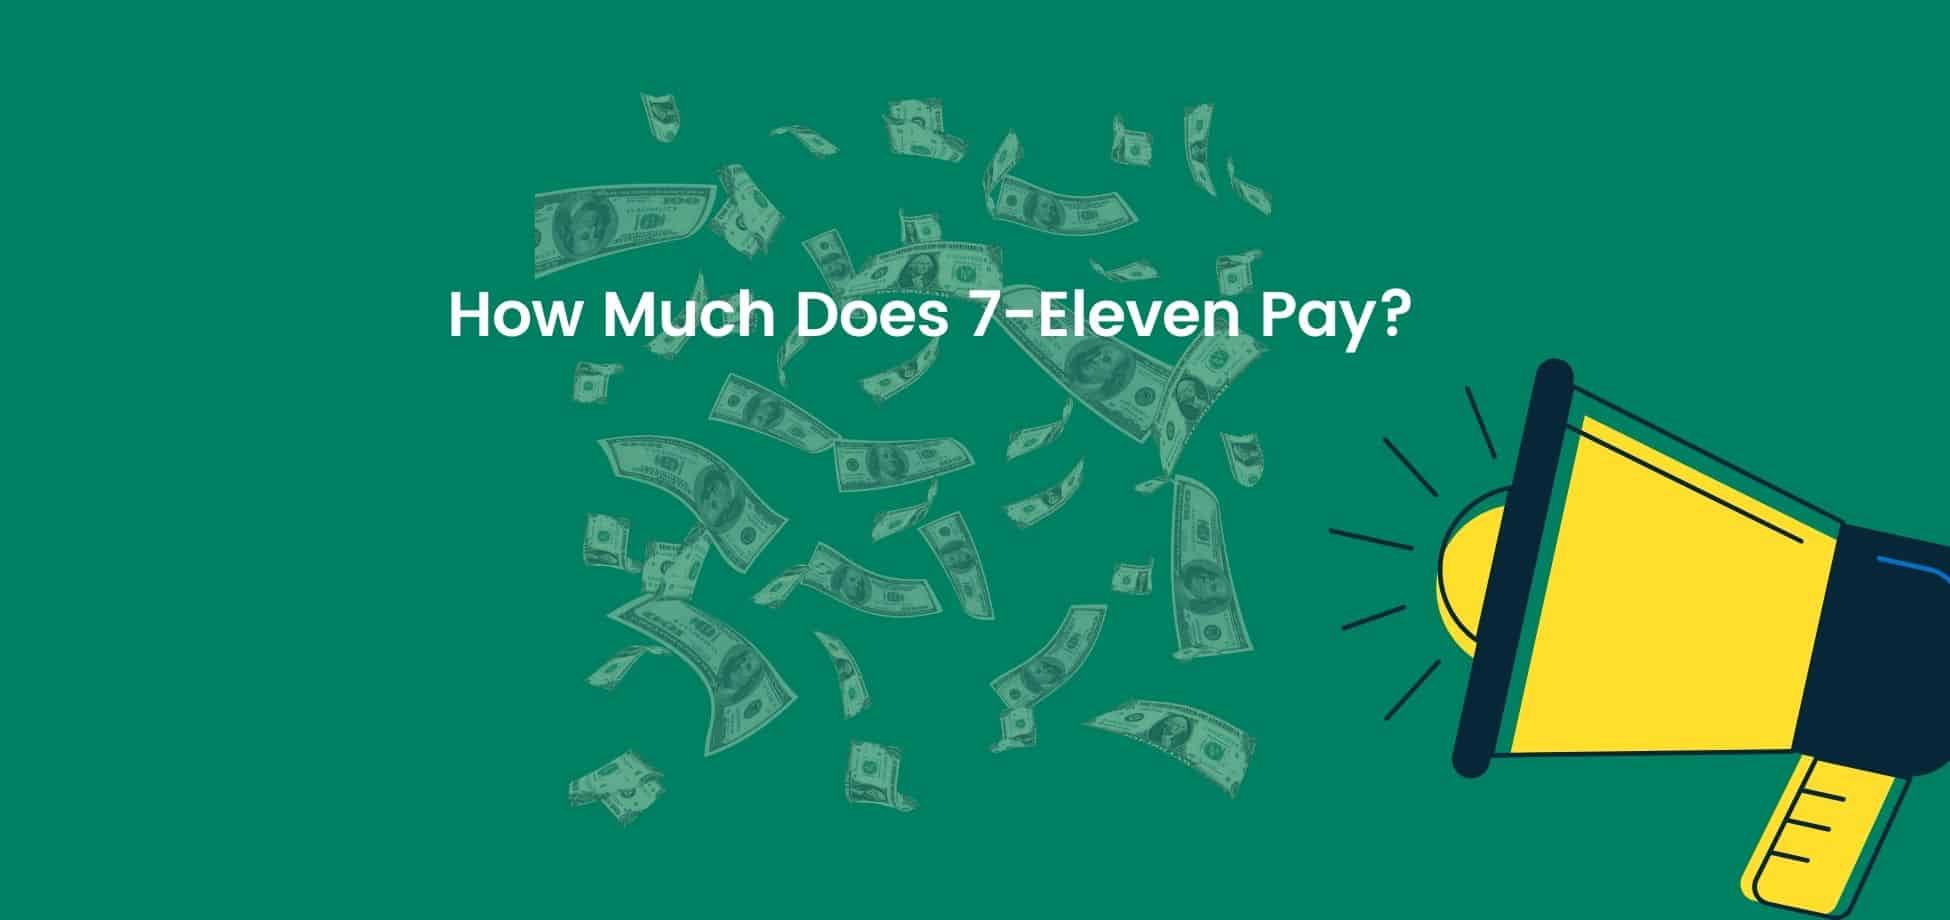 Here is how much 7-eleven pays its employees.